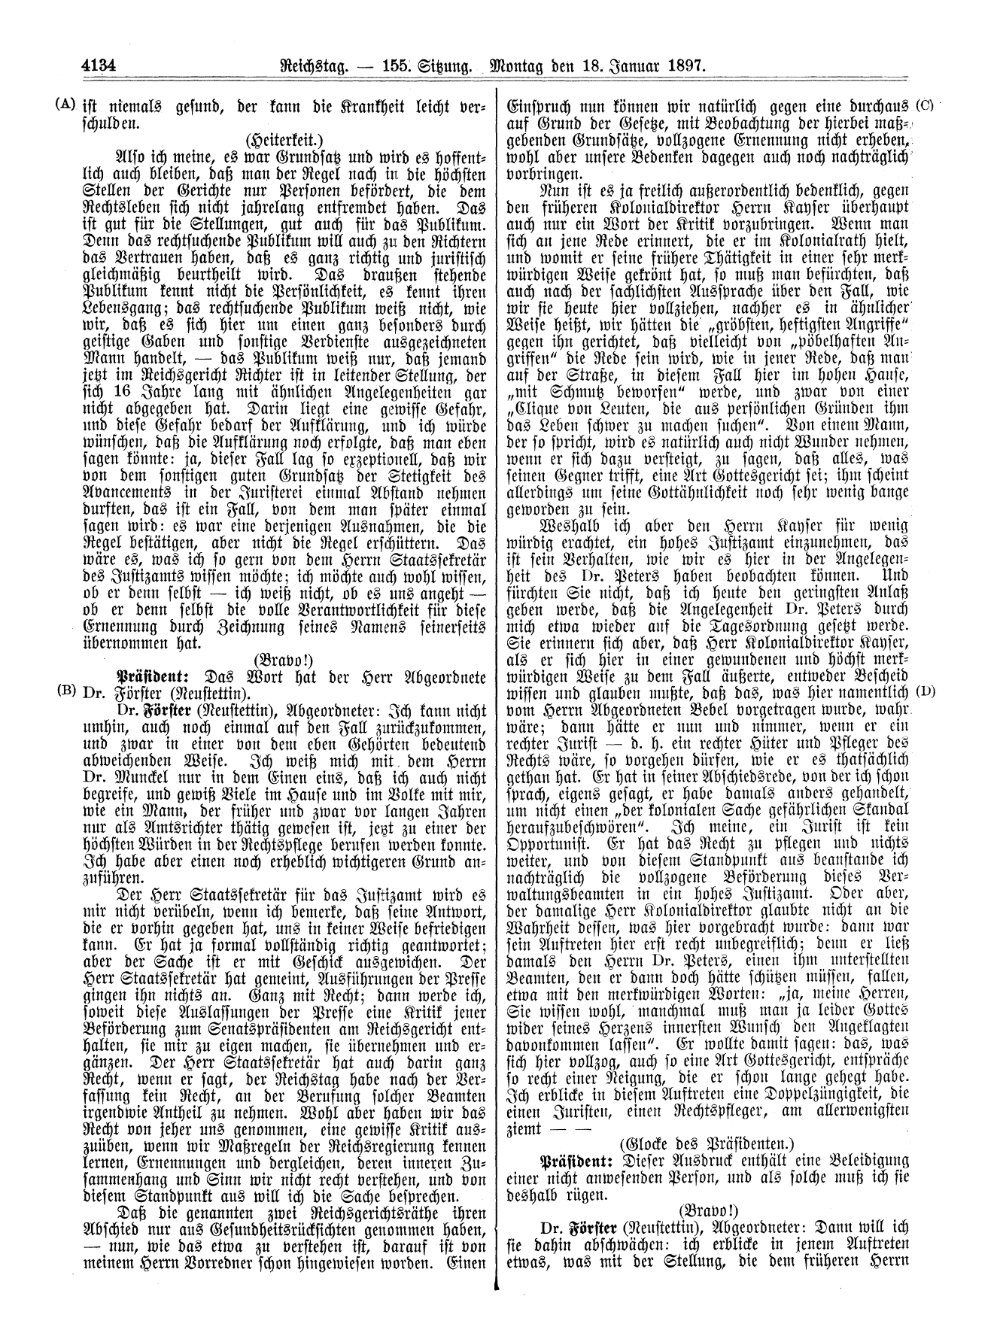 Scan of page 4134